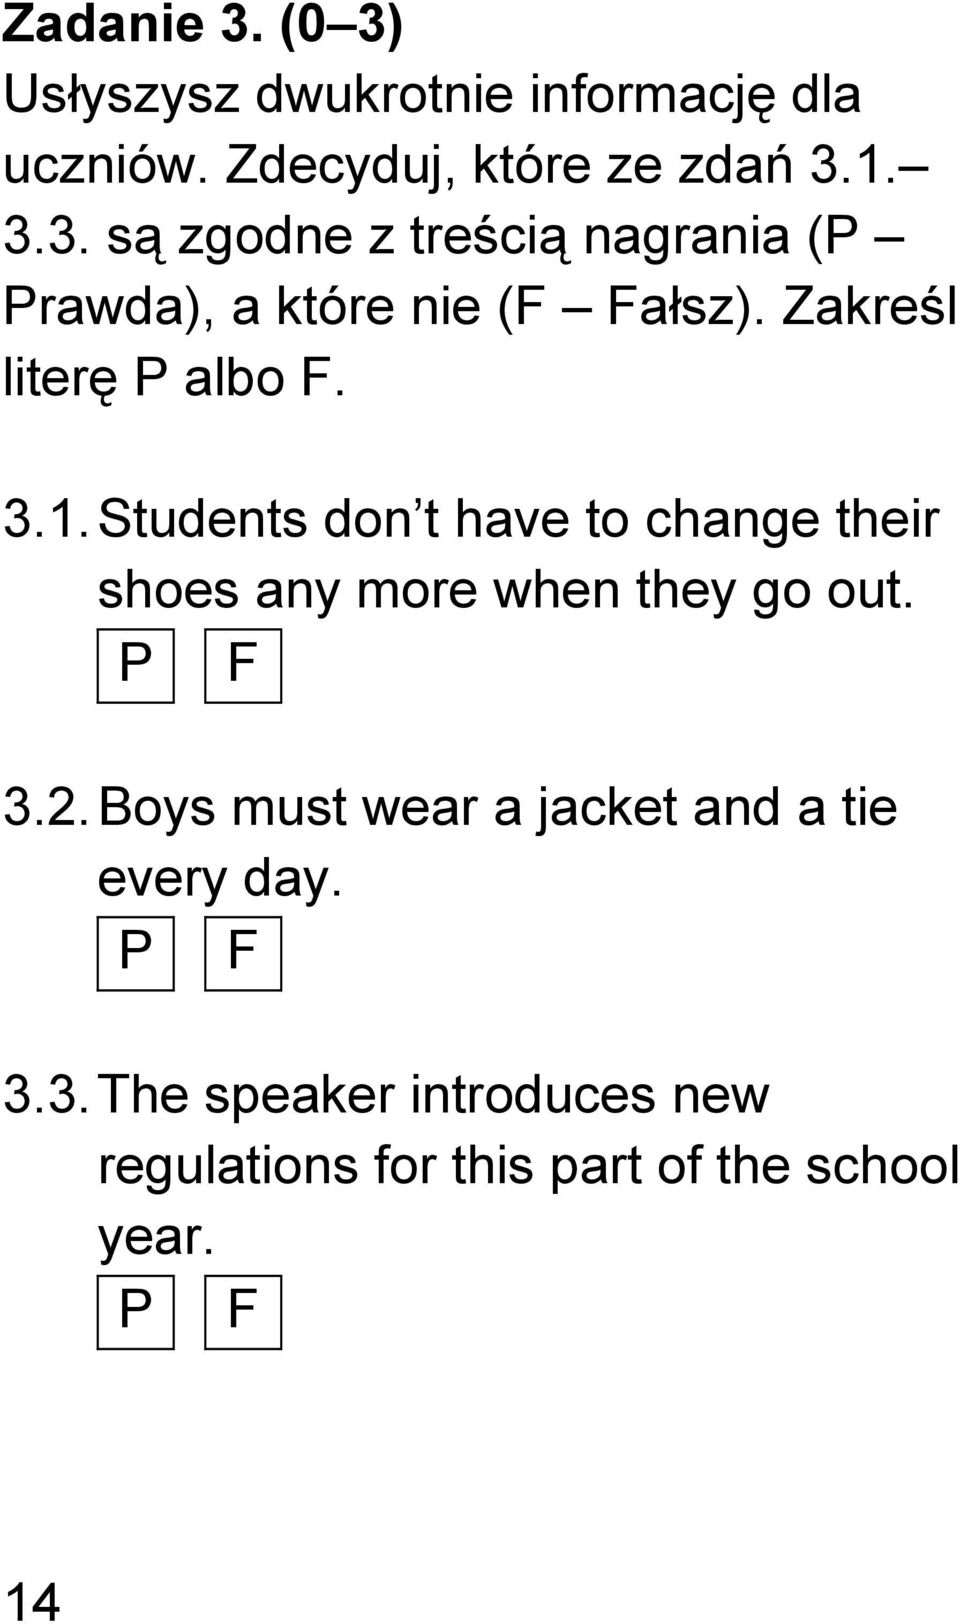 P F 3.2. Boys must wear a jacket and a tie every day. P F 3.3. The speaker introduces new regulations for this part of the school year.